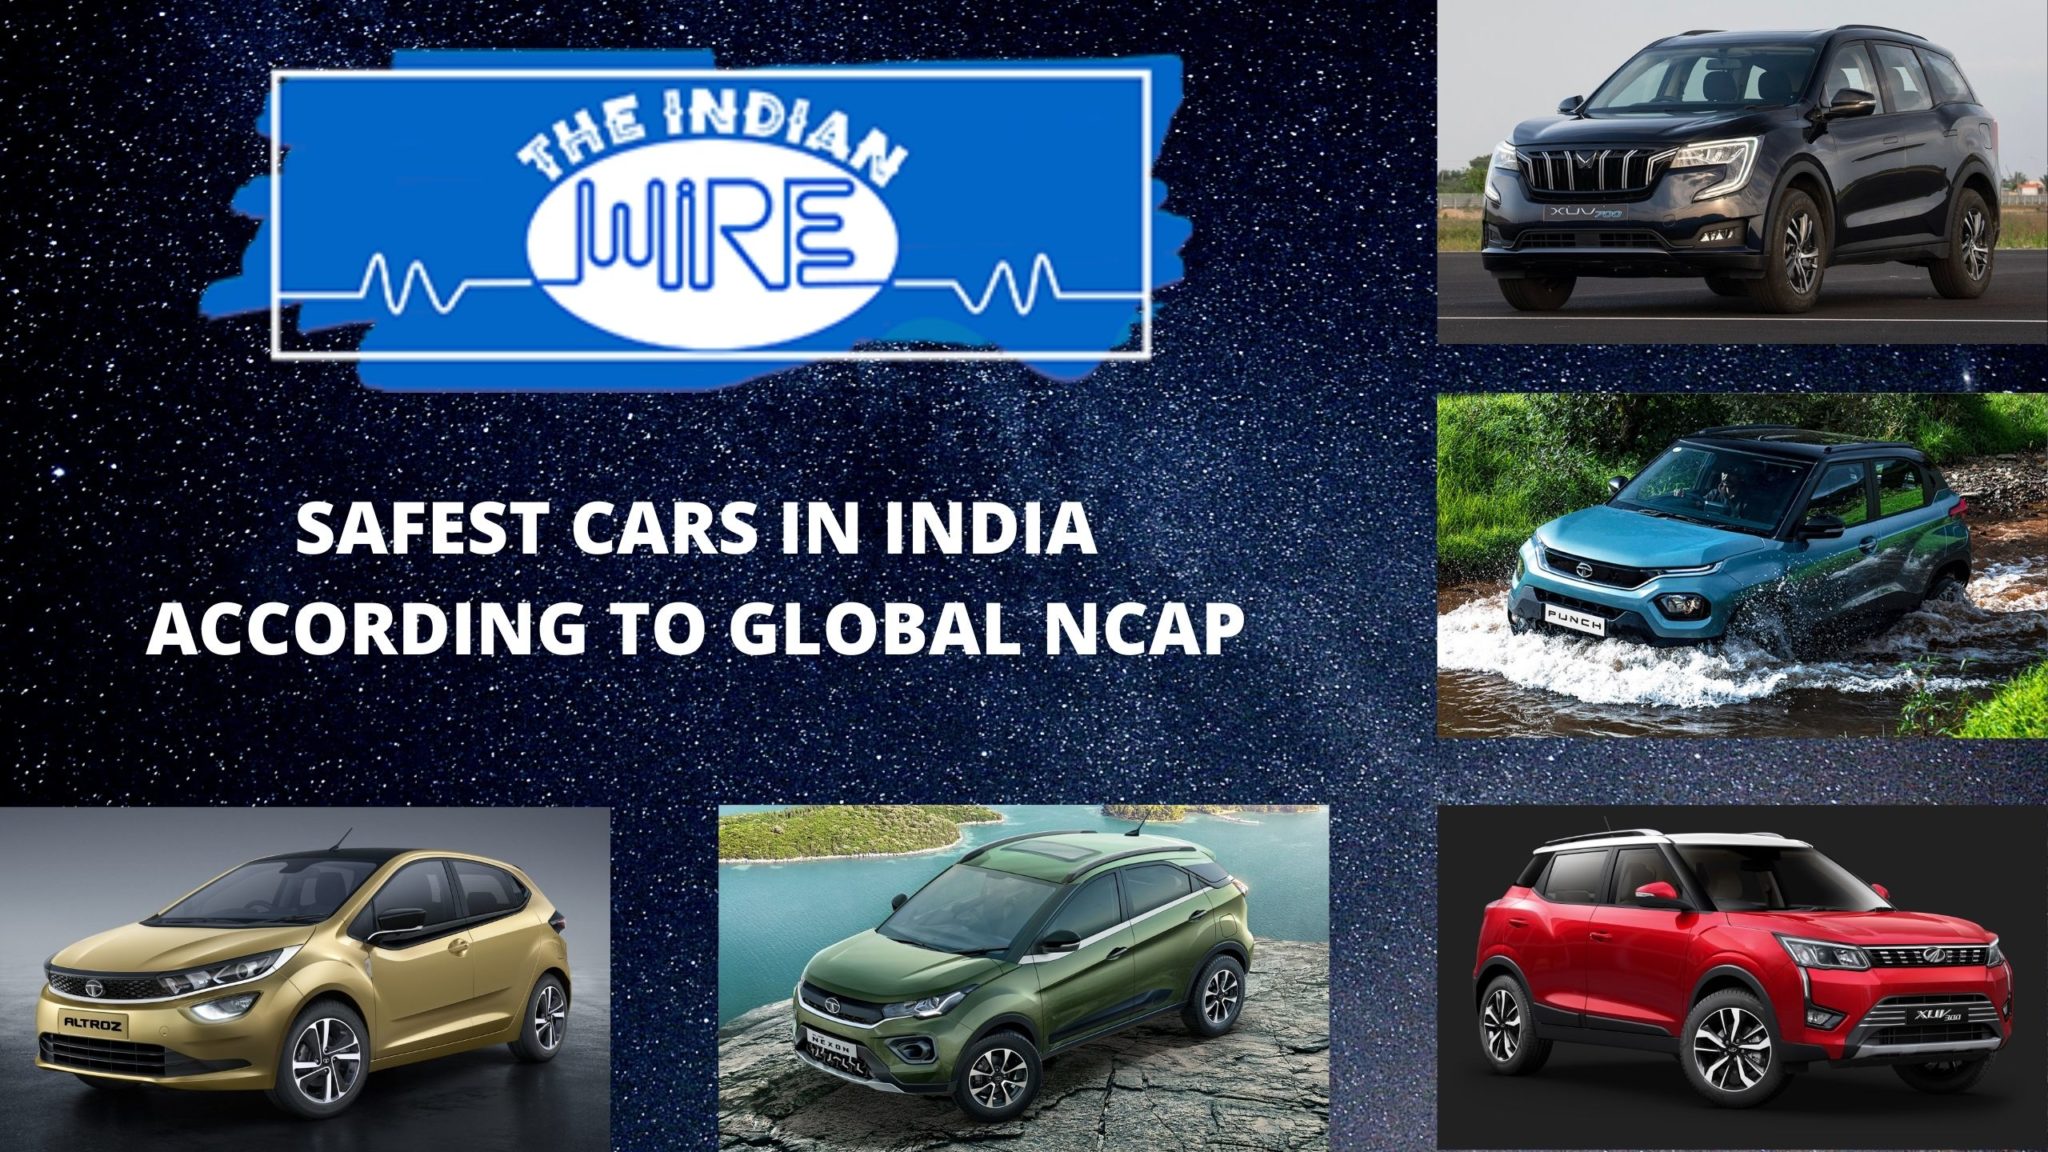 Take A Look At India's Top Five Safest Cars According To Global NCAP